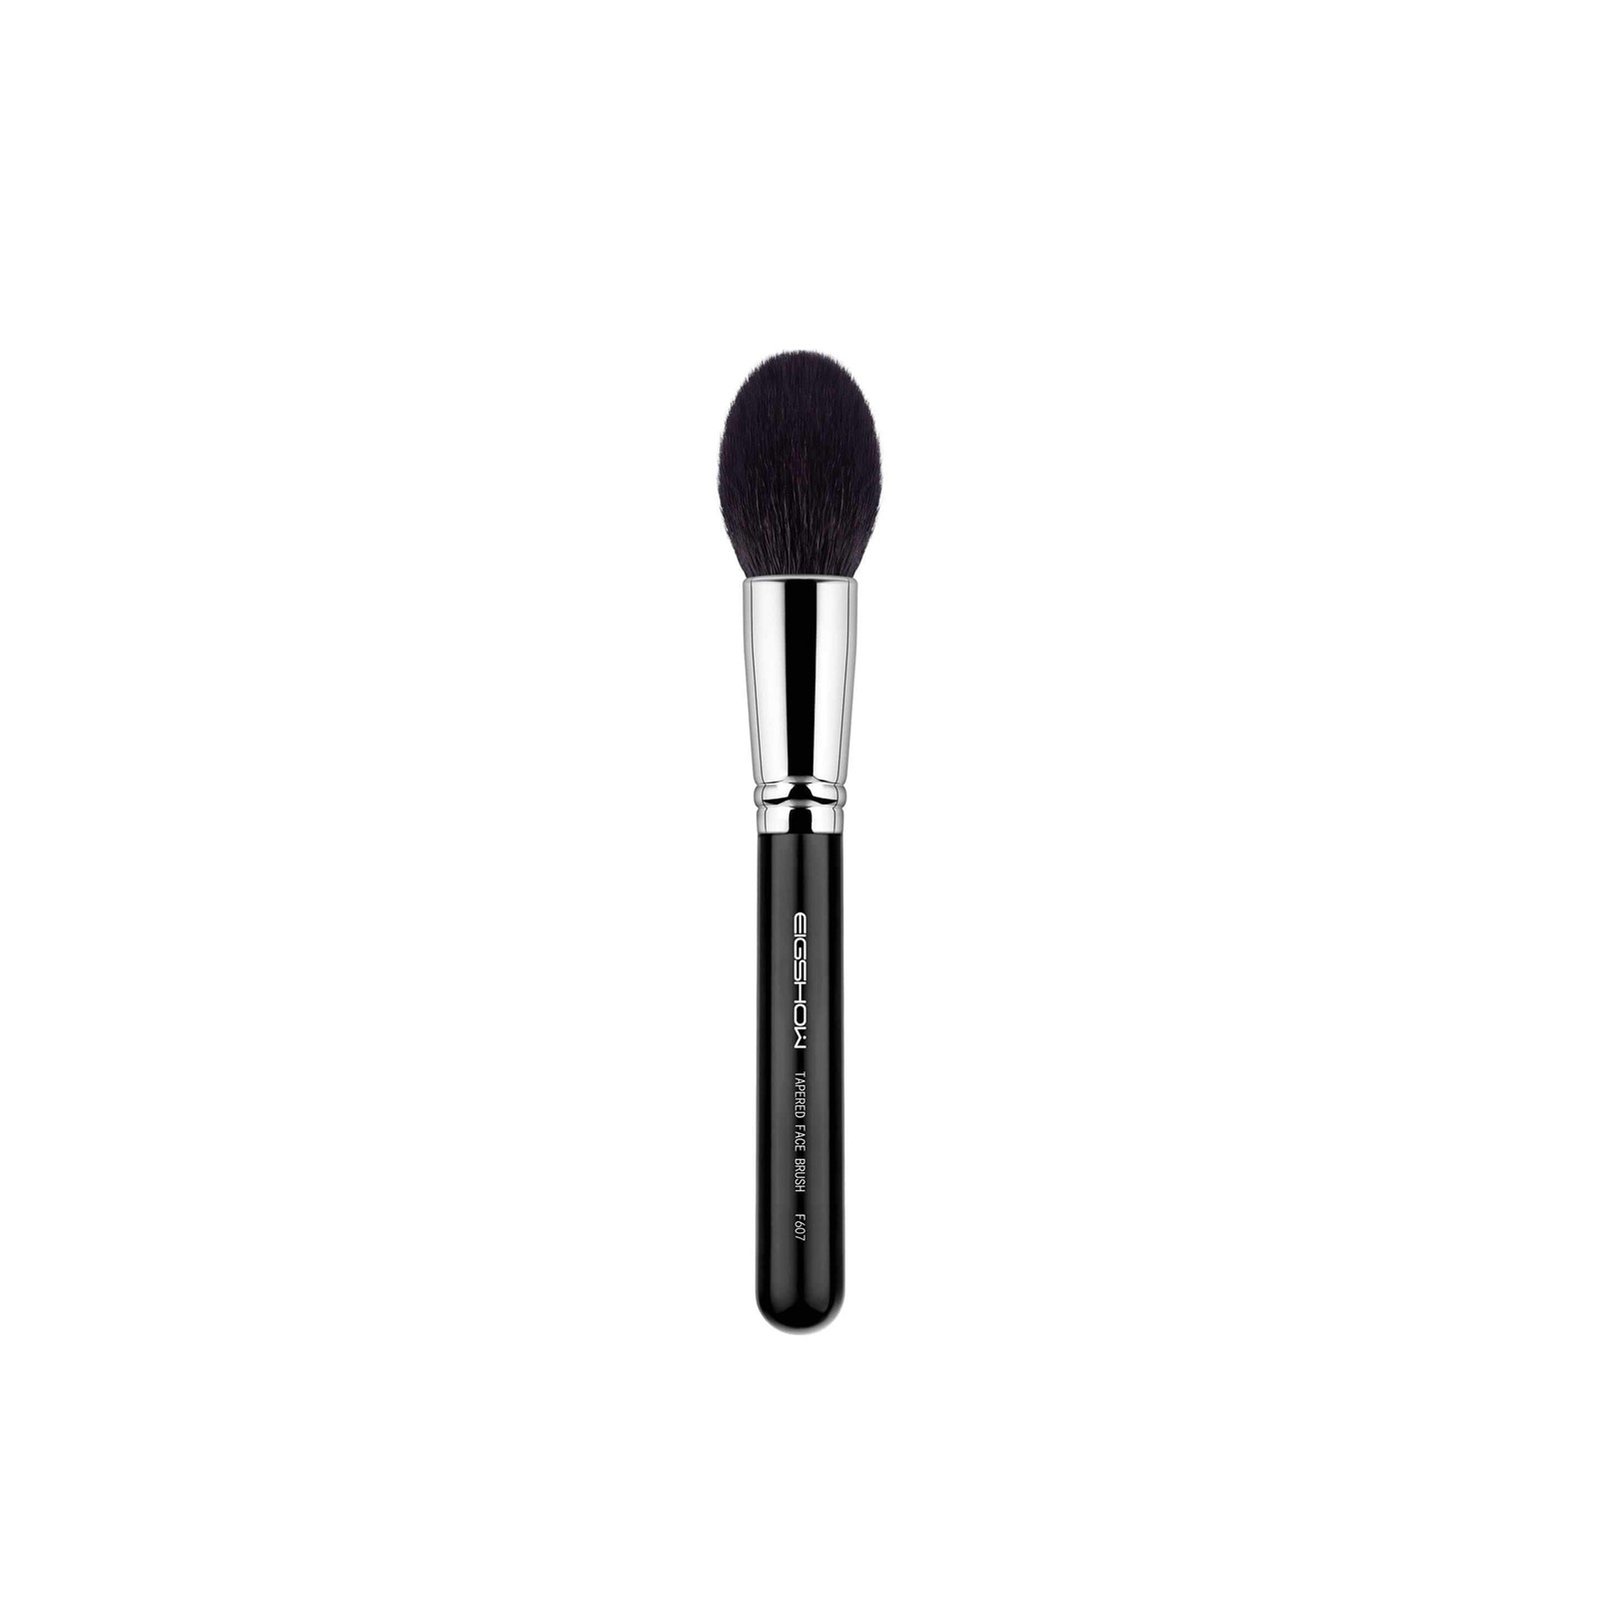 Eigshow Beauty Tapered Face Brush F607